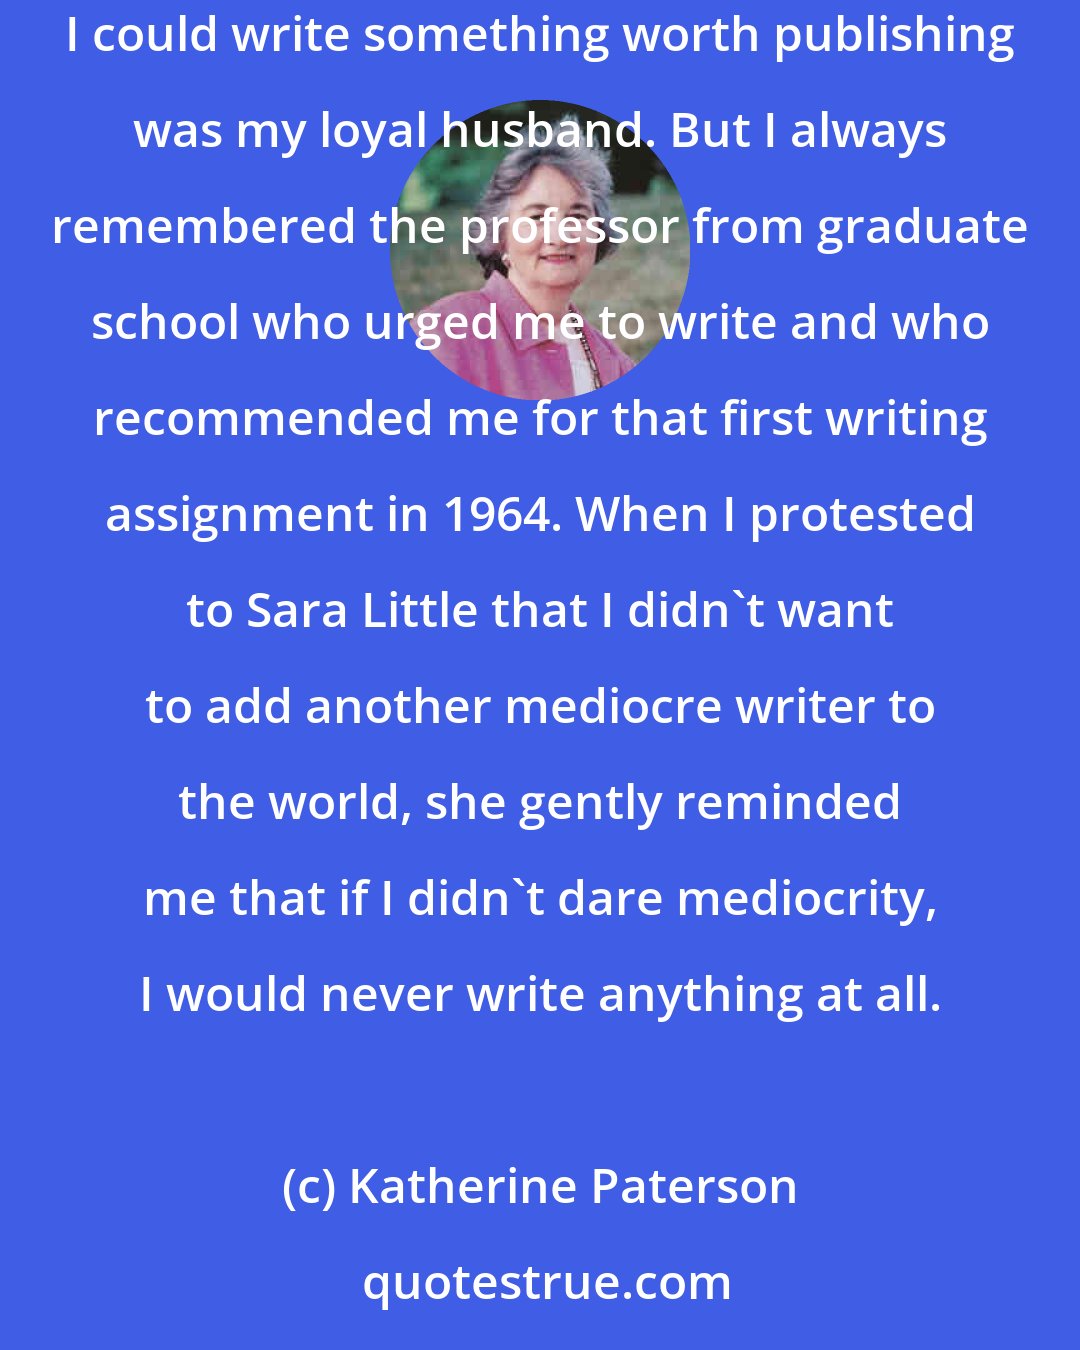 Katherine Paterson: Still, I kept writing. I had no guarantee that I would someday win awards for writing. Heavens, the only person during that time who seemed to think I could write something worth publishing was my loyal husband. But I always remembered the professor from graduate school who urged me to write and who recommended me for that first writing assignment in 1964. When I protested to Sara Little that I didn't want to add another mediocre writer to the world, she gently reminded me that if I didn't dare mediocrity, I would never write anything at all.